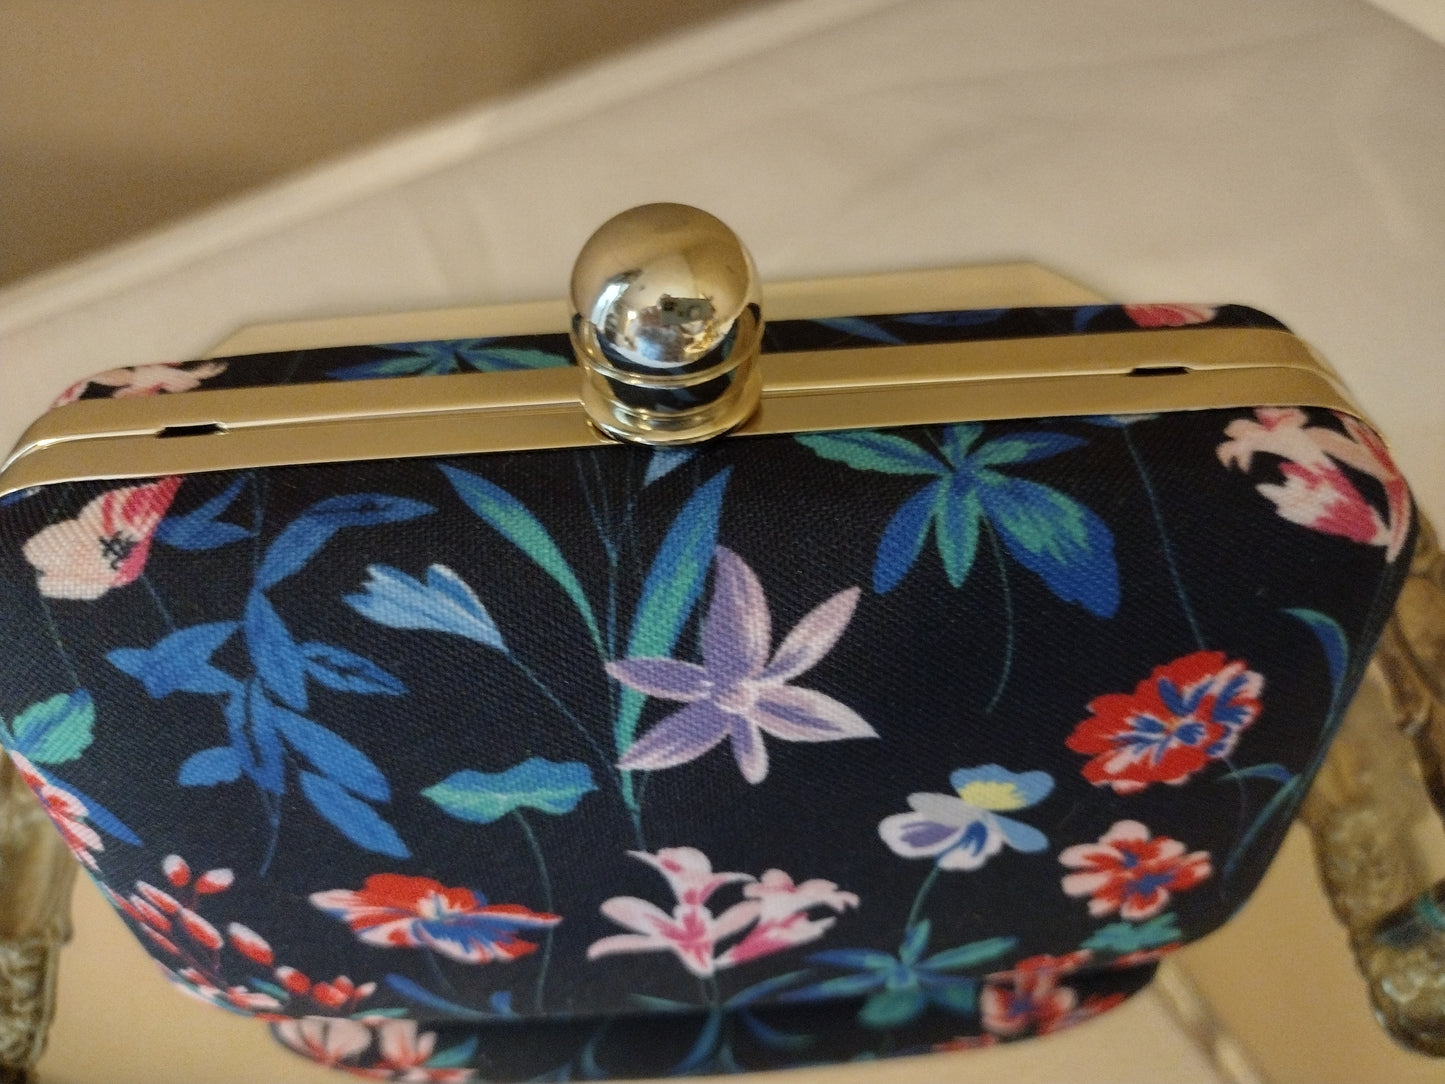 Black & Floral Hard Case Clutch / Purse with Chain Strap - Talbots (Retired)